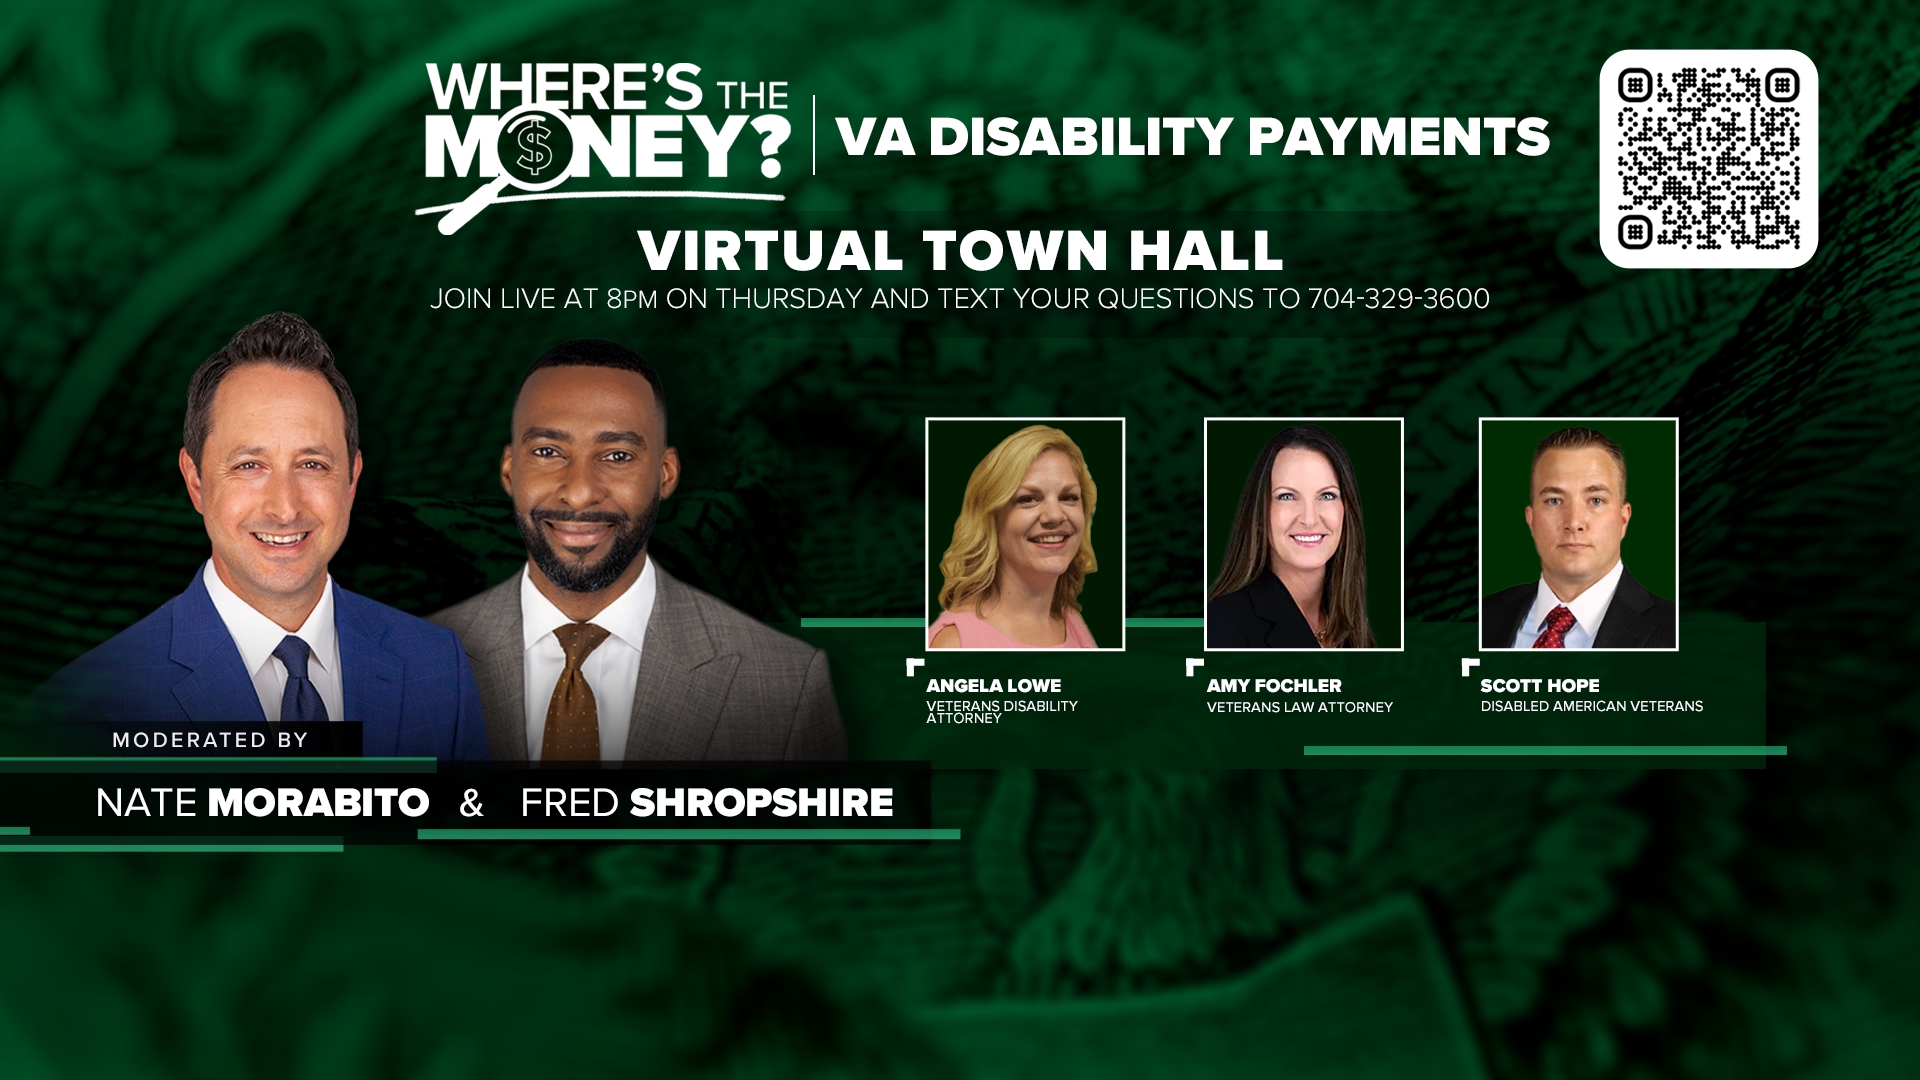 Veteran disability payment issues: A virtual town hall